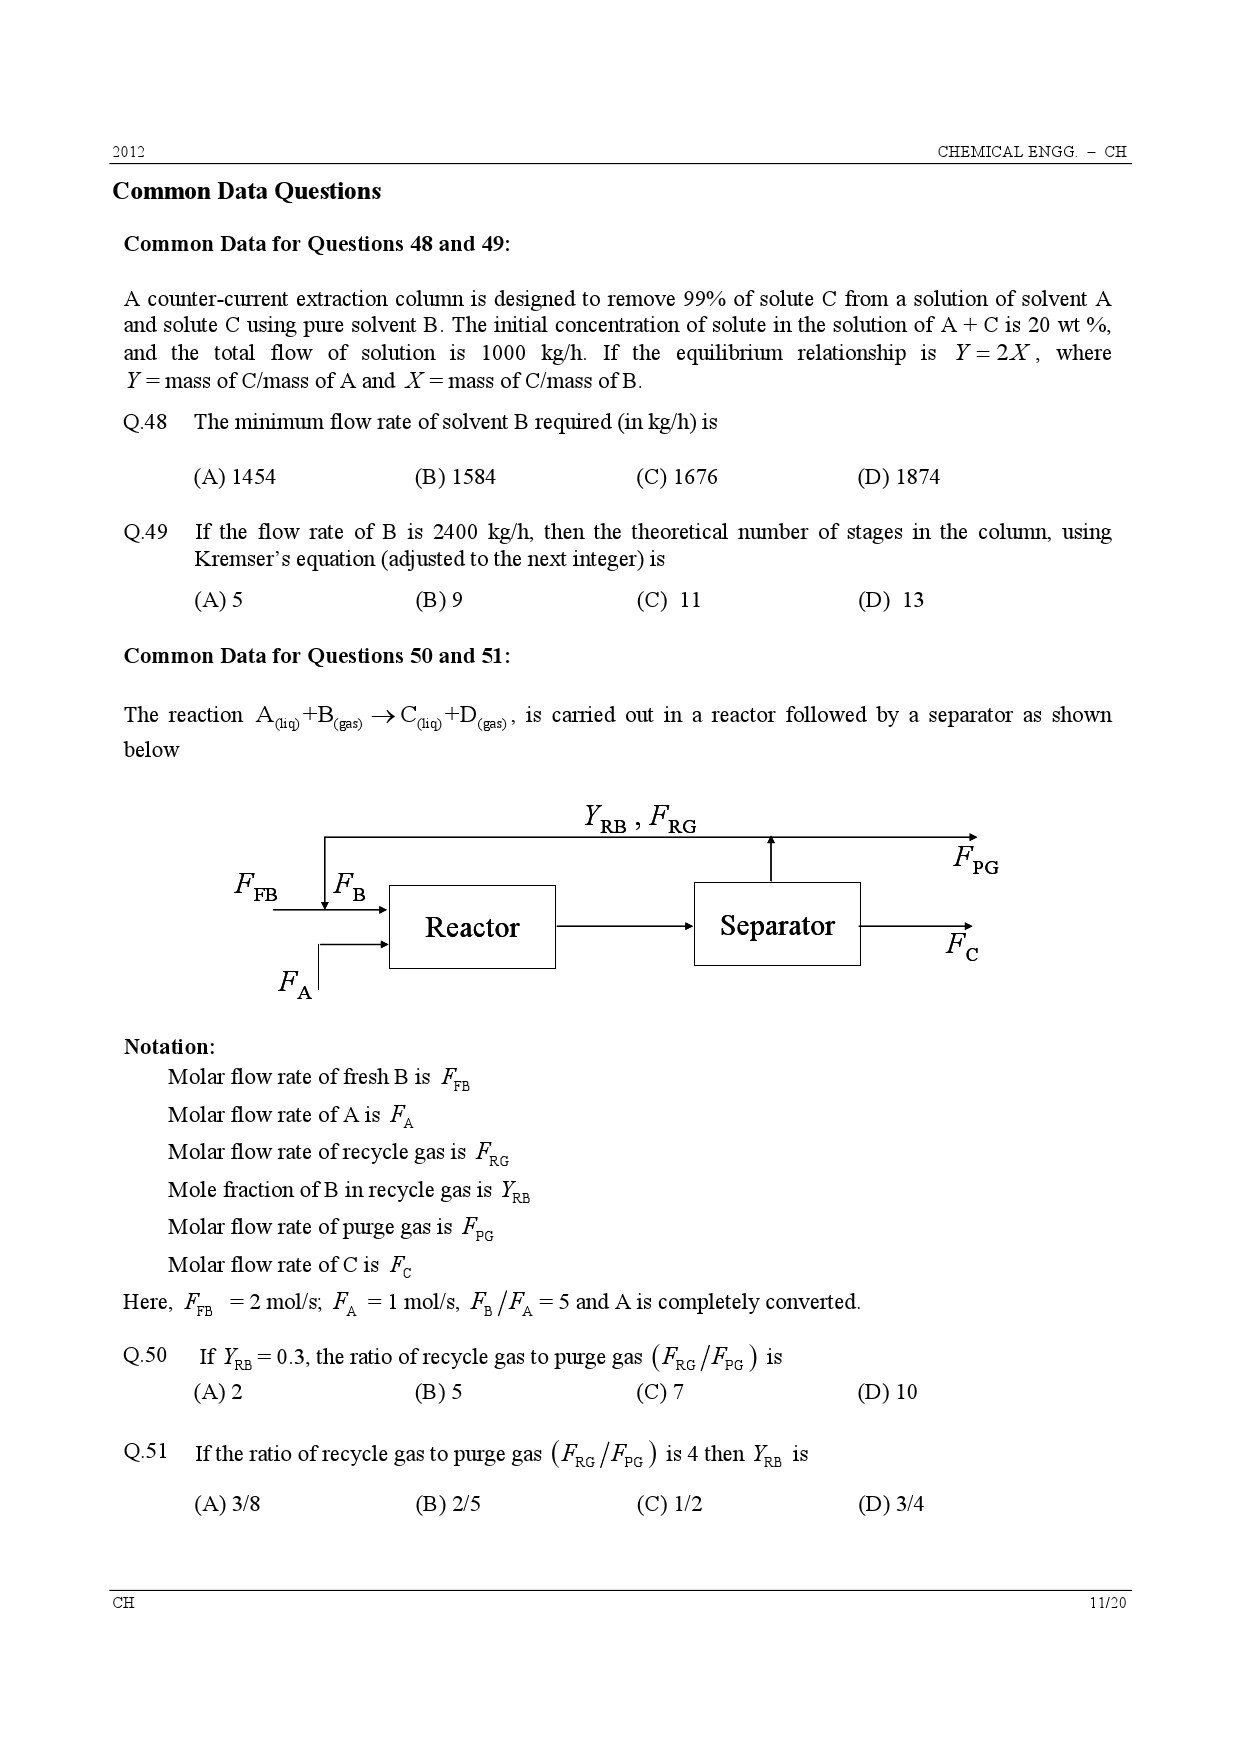 GATE Exam Question Paper 2012 Chemical Engineering 11